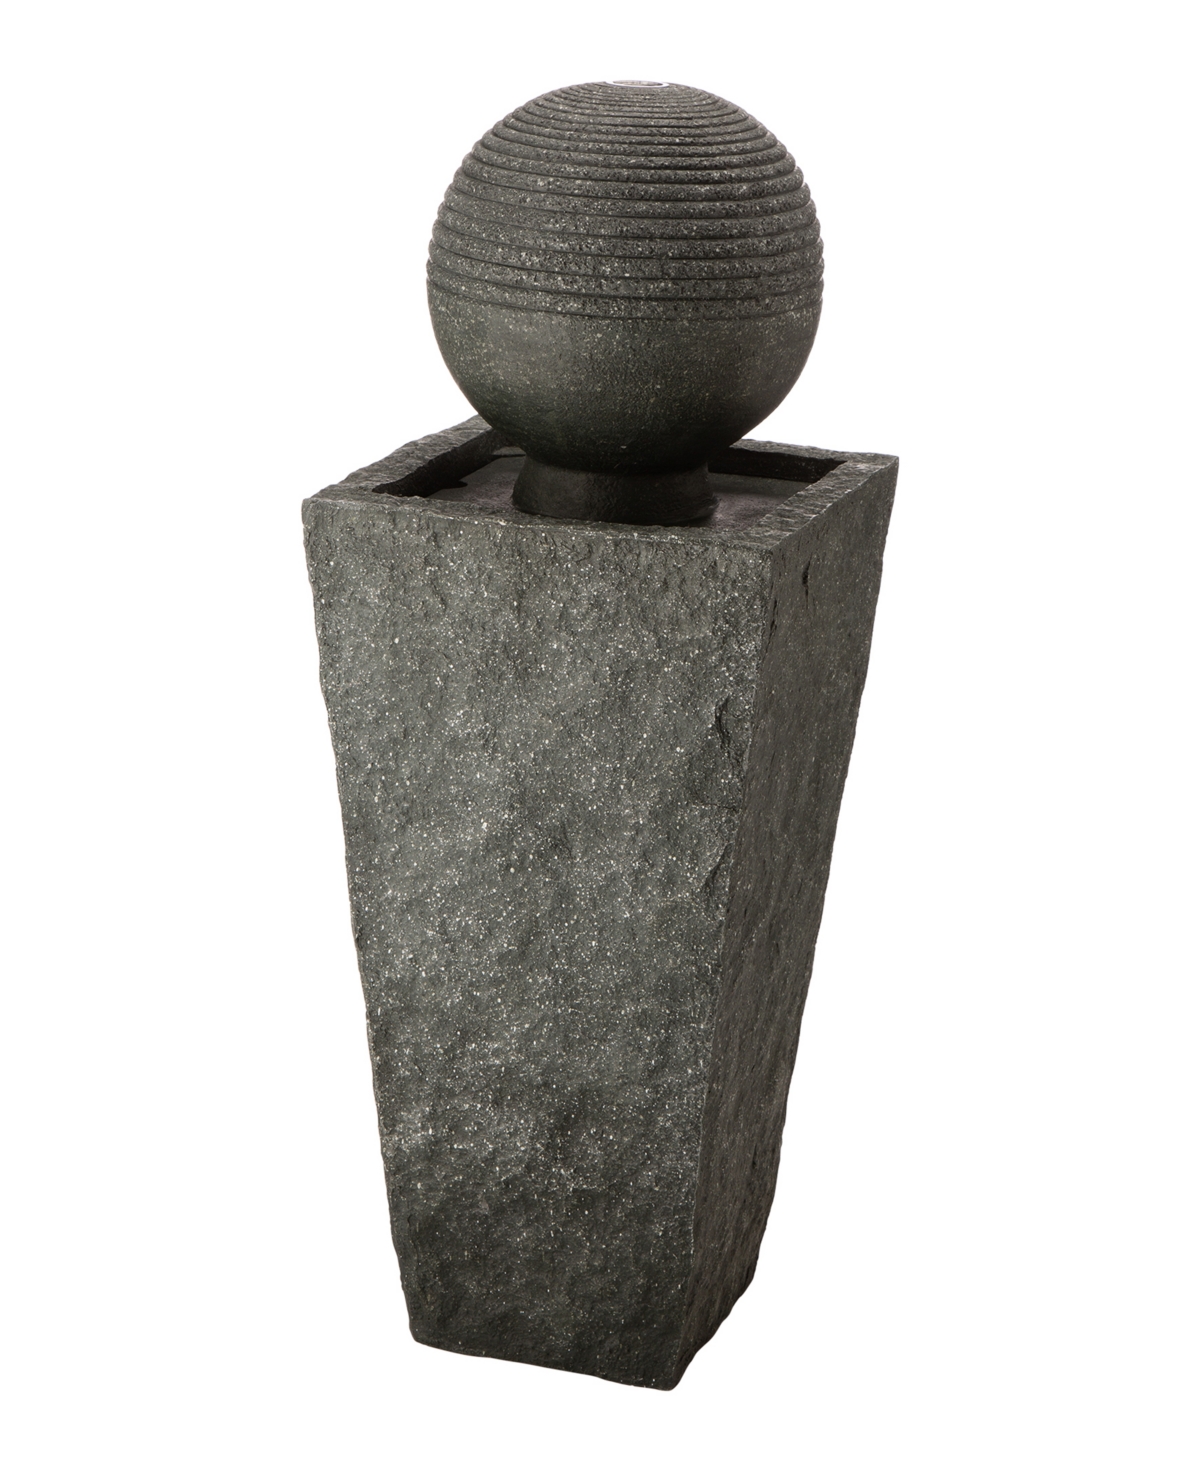 Rippling Floating Sphere Pedestal Outdoor Fountain with Pump and Led Light - Gray